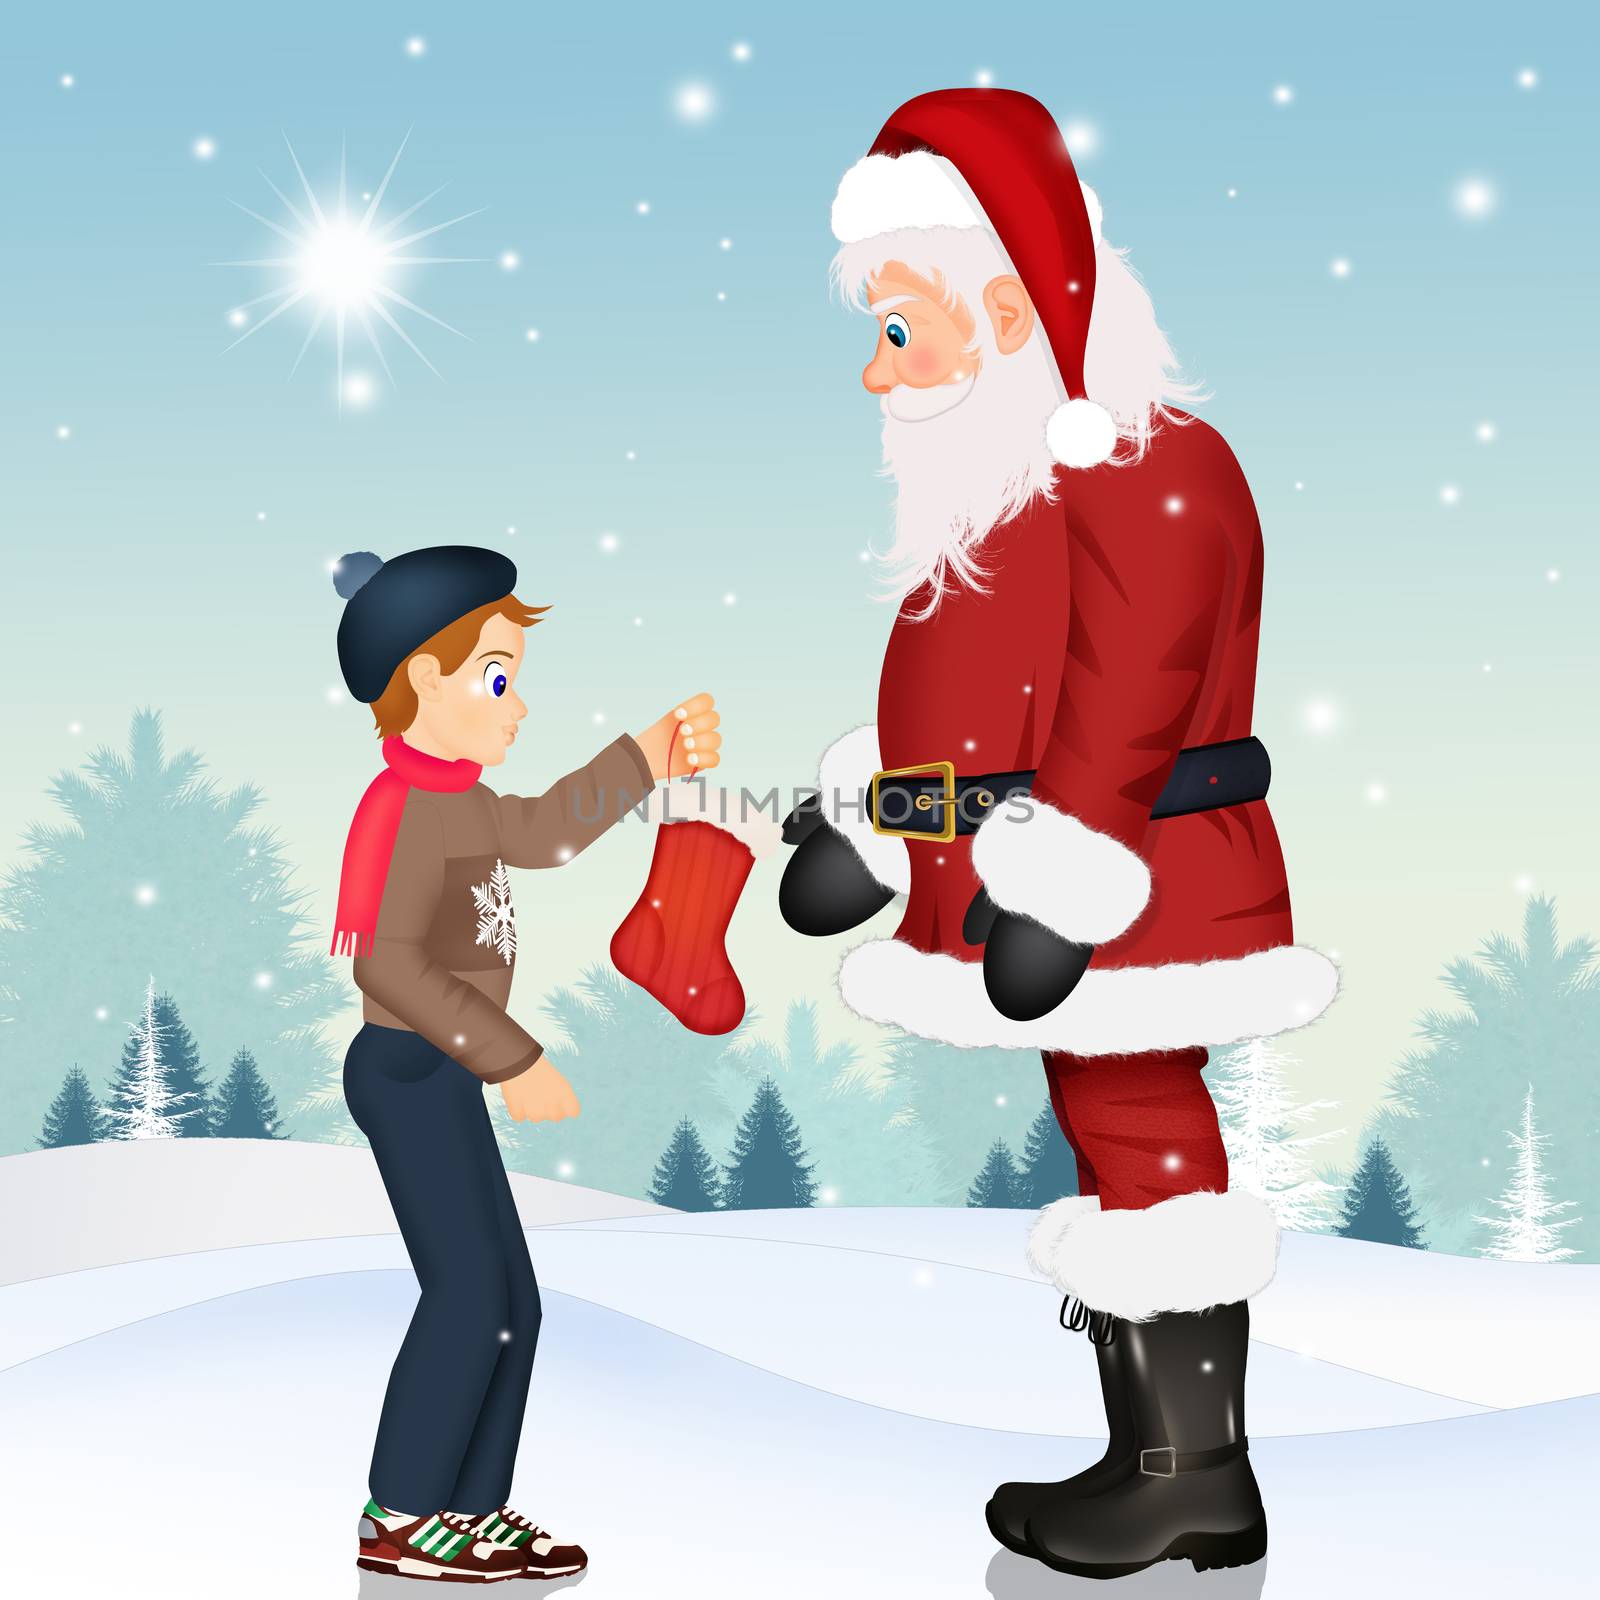 Santa Claus and children with Christmas socks by adrenalina